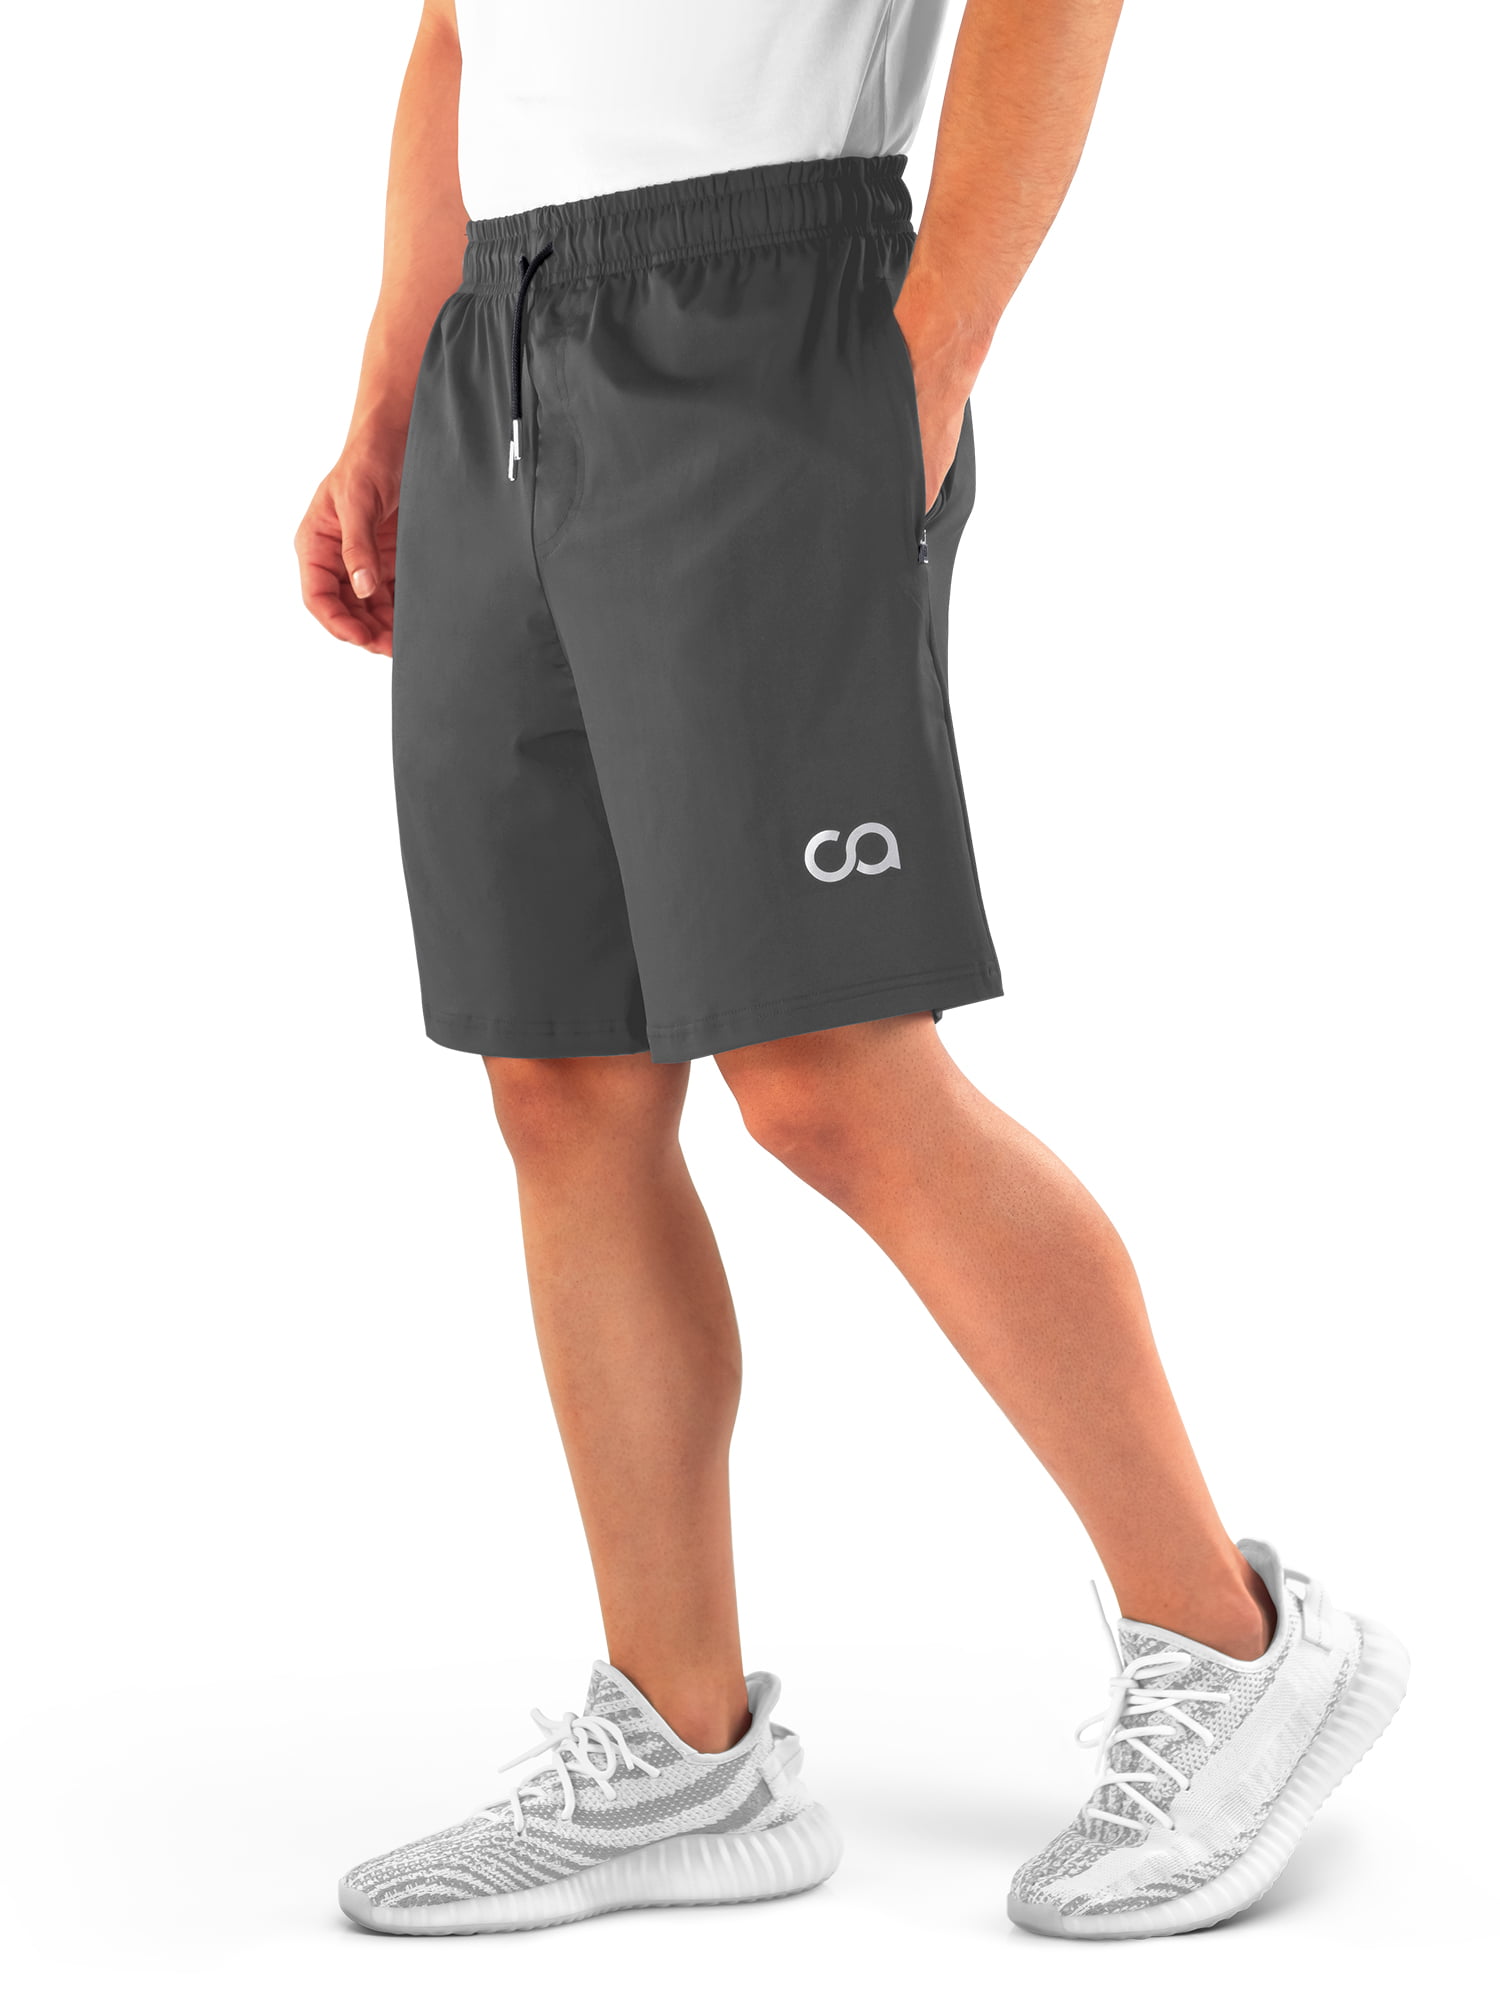 mens sports shorts with zip pockets